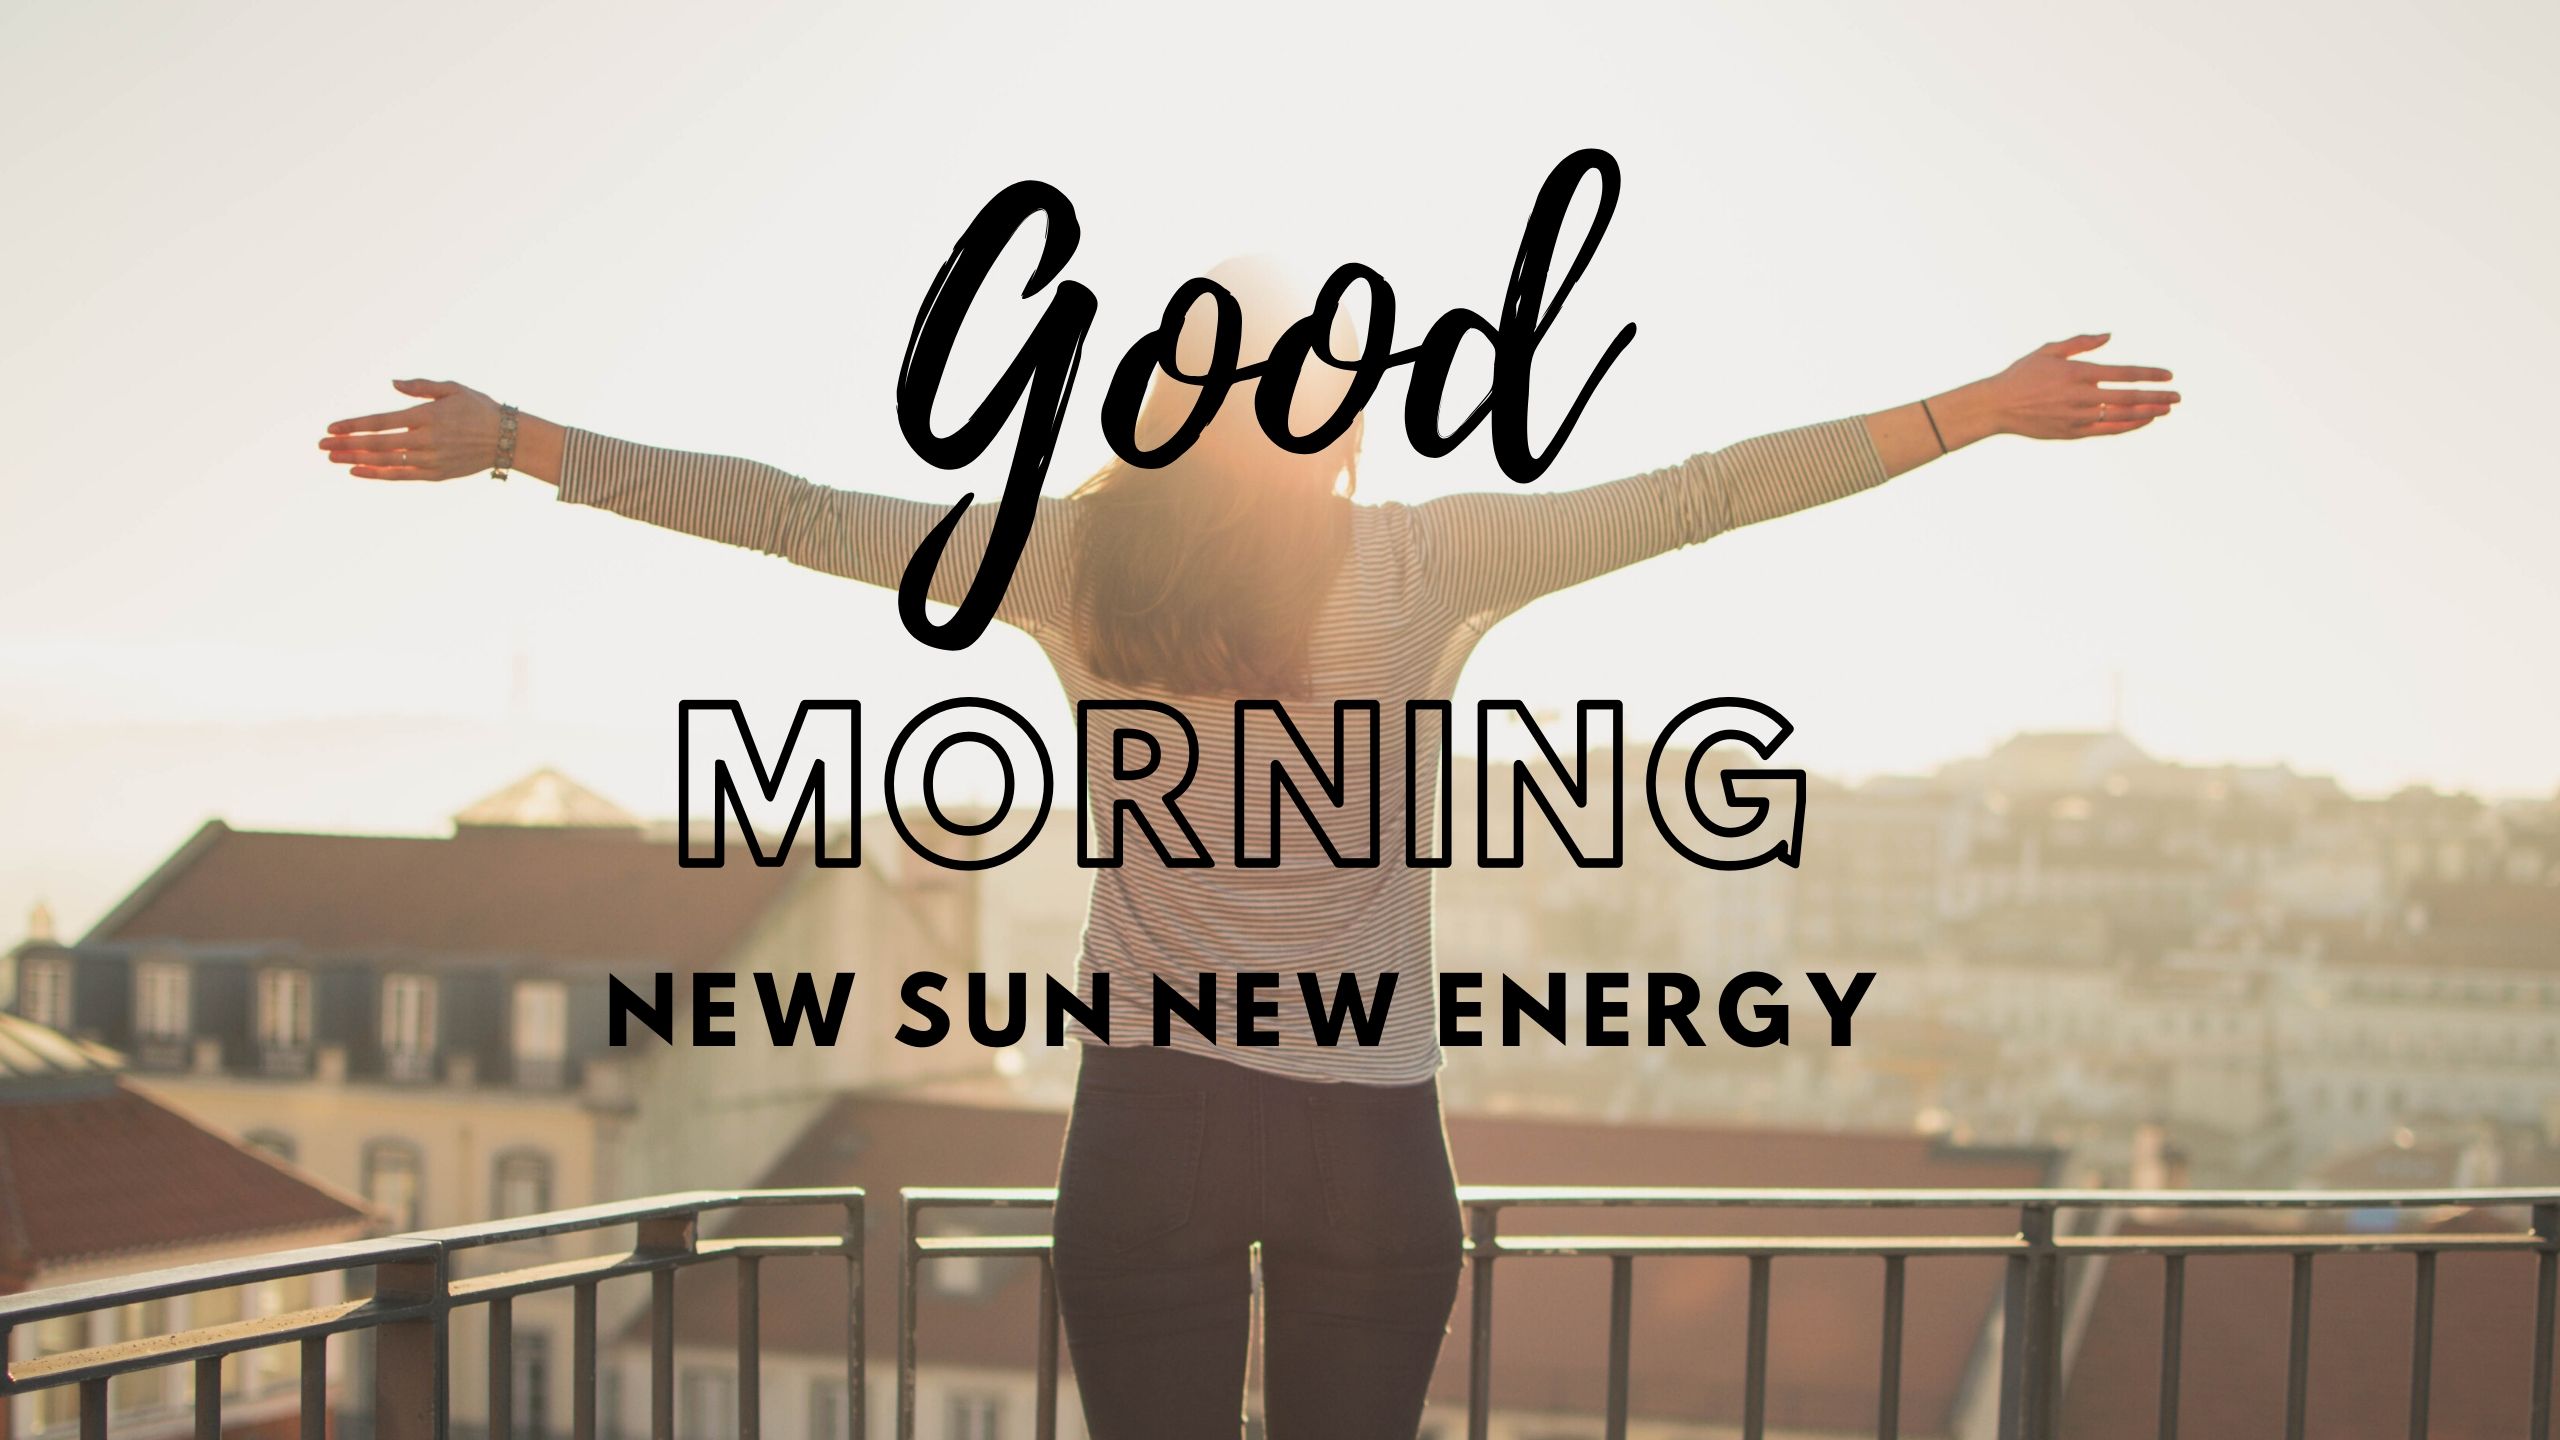 Good Morning New Sun New Energy image full HD free download.